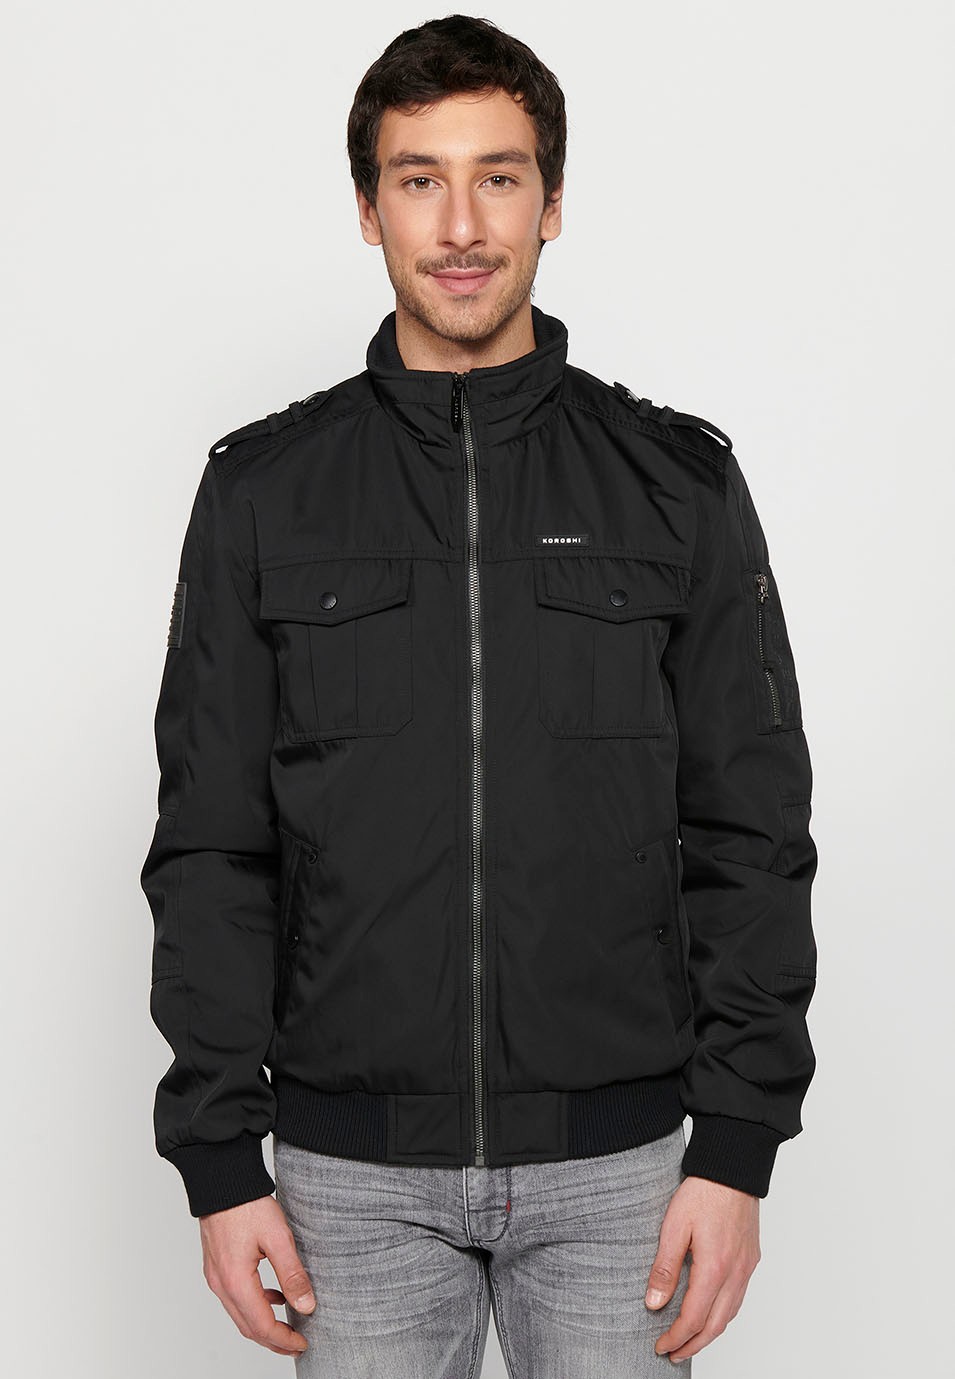 Black Long Sleeve Jacket with Round Neck and Front Zipper Closure with Flap Pockets for Men 4